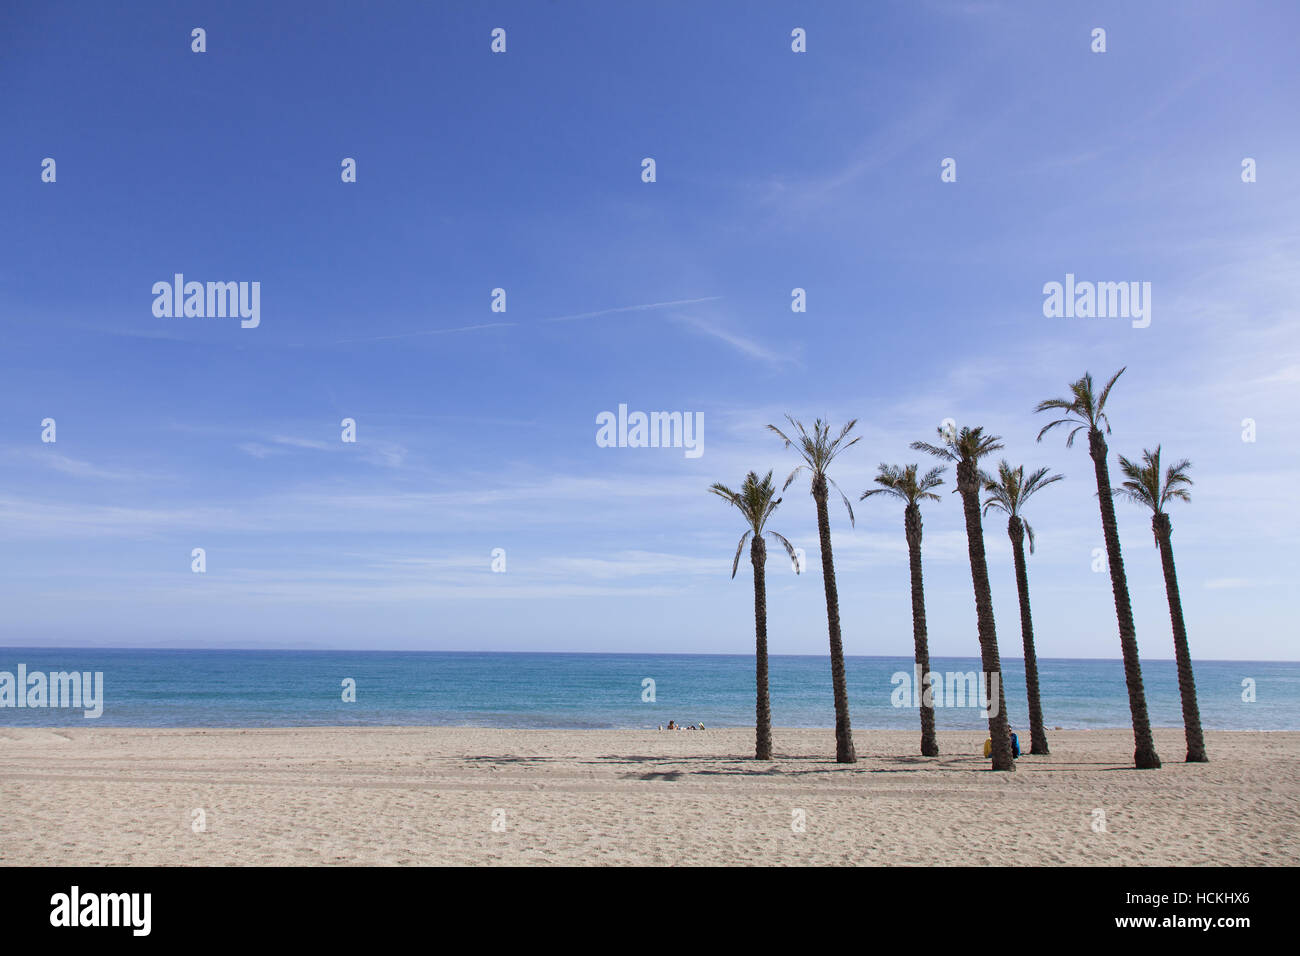 beach with palm trees and a blue sky Stock Photo